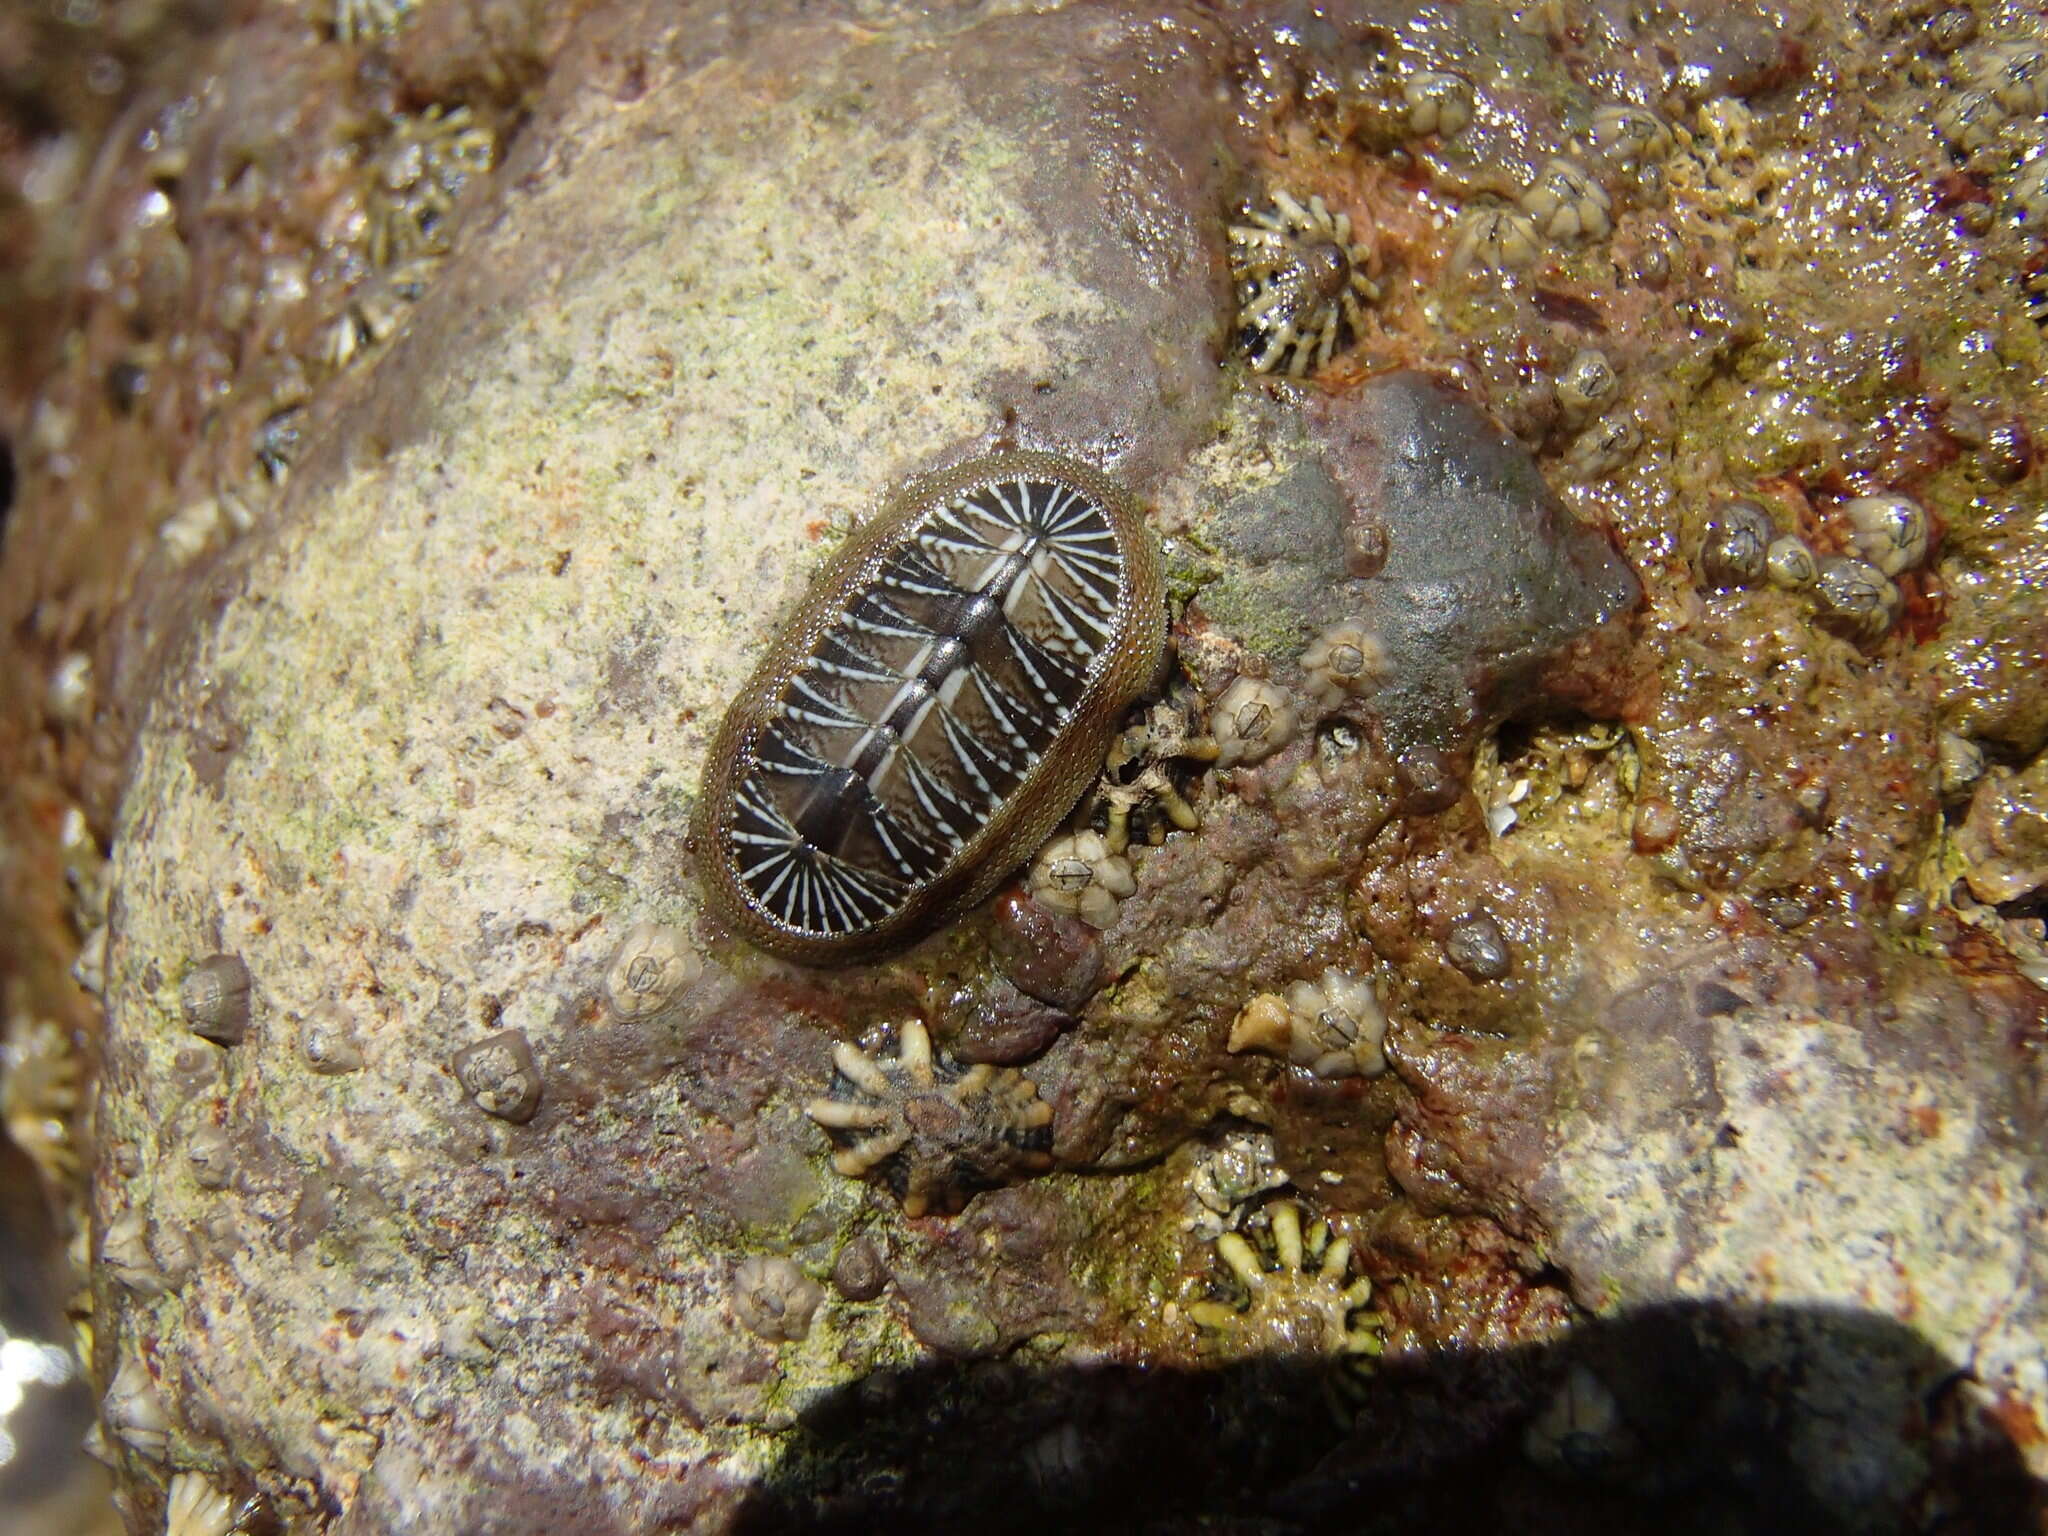 Image de Chiton albolineatus Broderip & G. B. Sowerby I 1829